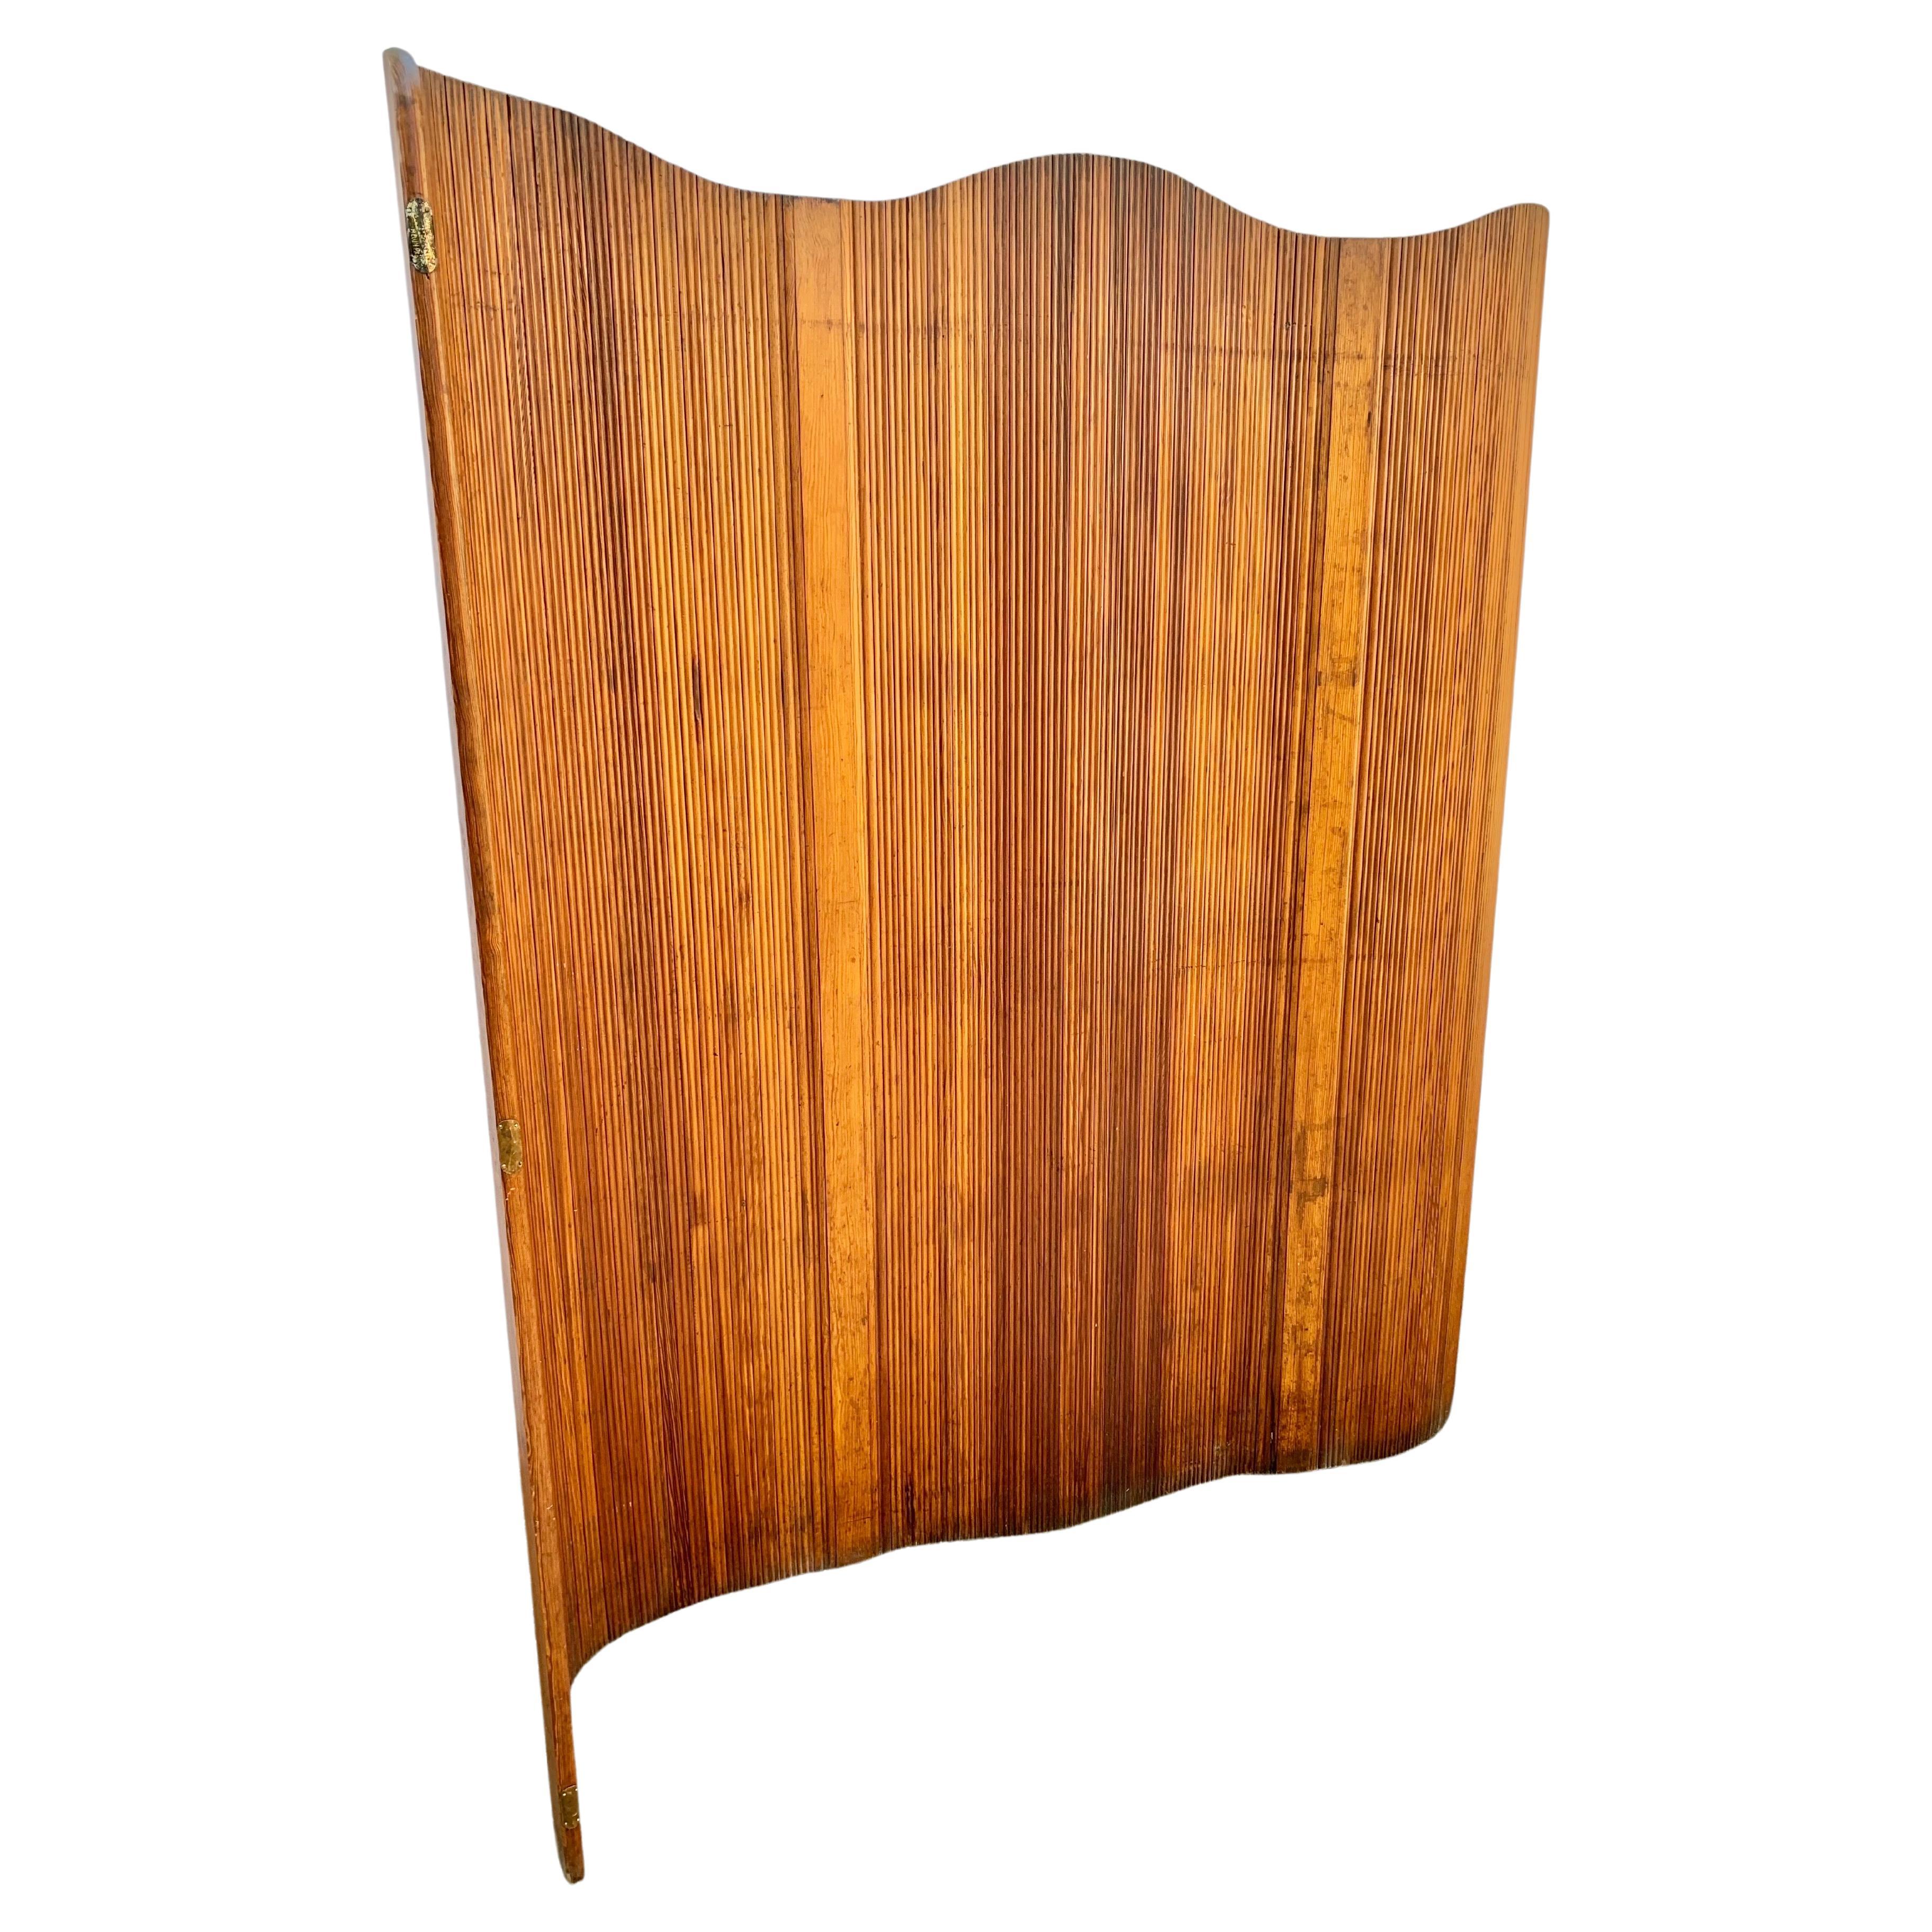 Found in France, this French Art Deco freestanding tambour room divider / folding screen in patinated heart pine was made by Baumann, Melun Paris. This flexible paravent is made out of strips of wood allowing the screen to stand freely, extend into